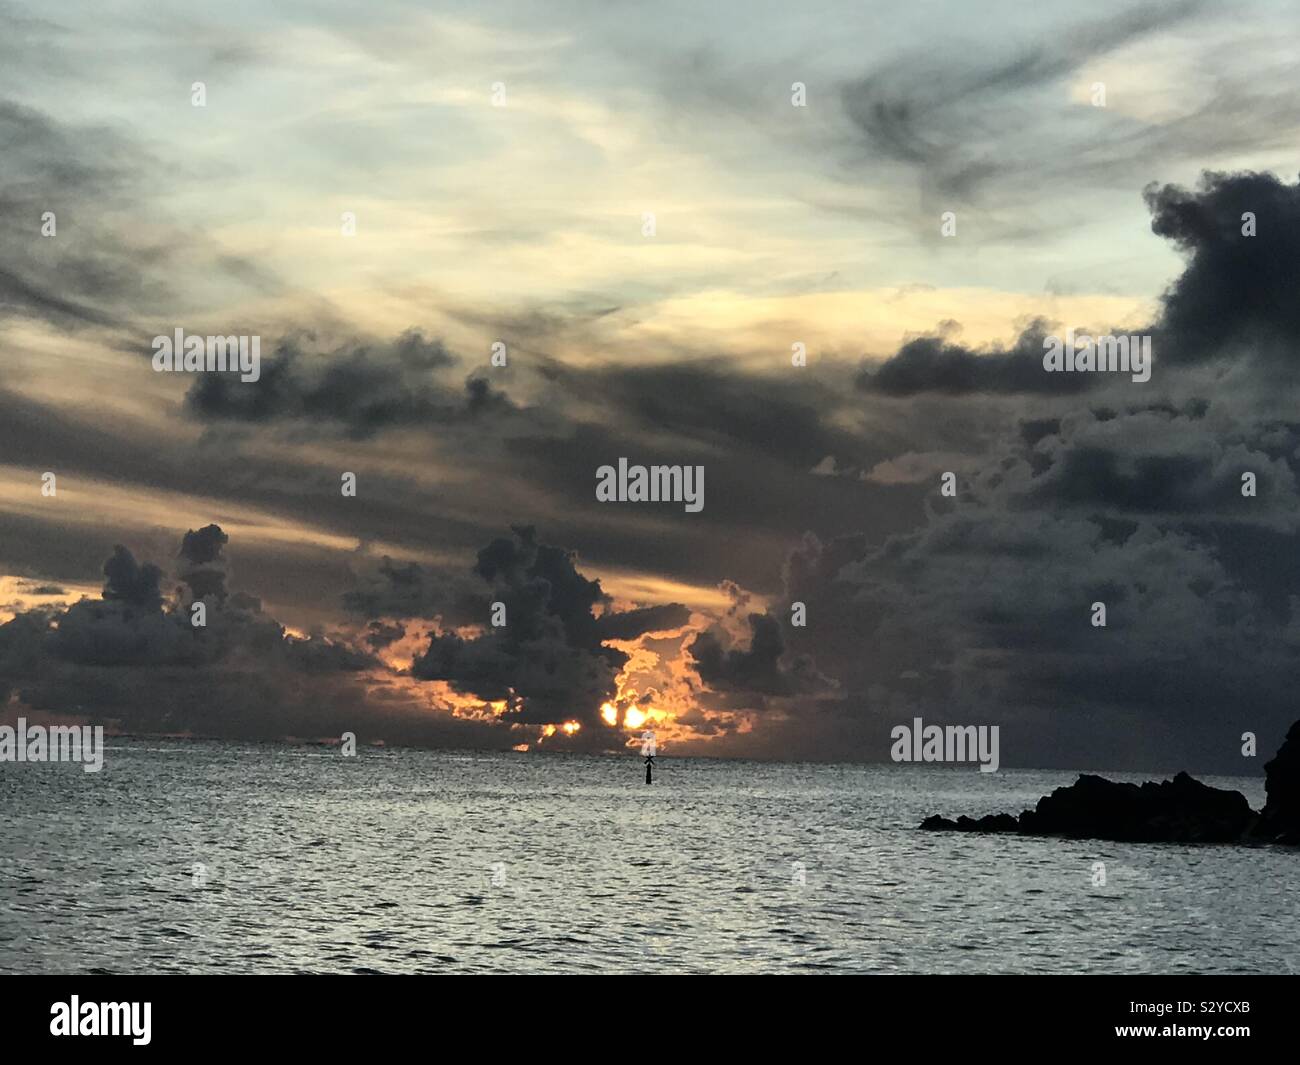 Exceptional sunrise seeing from shell beach in Saint Barts island Stock Photo